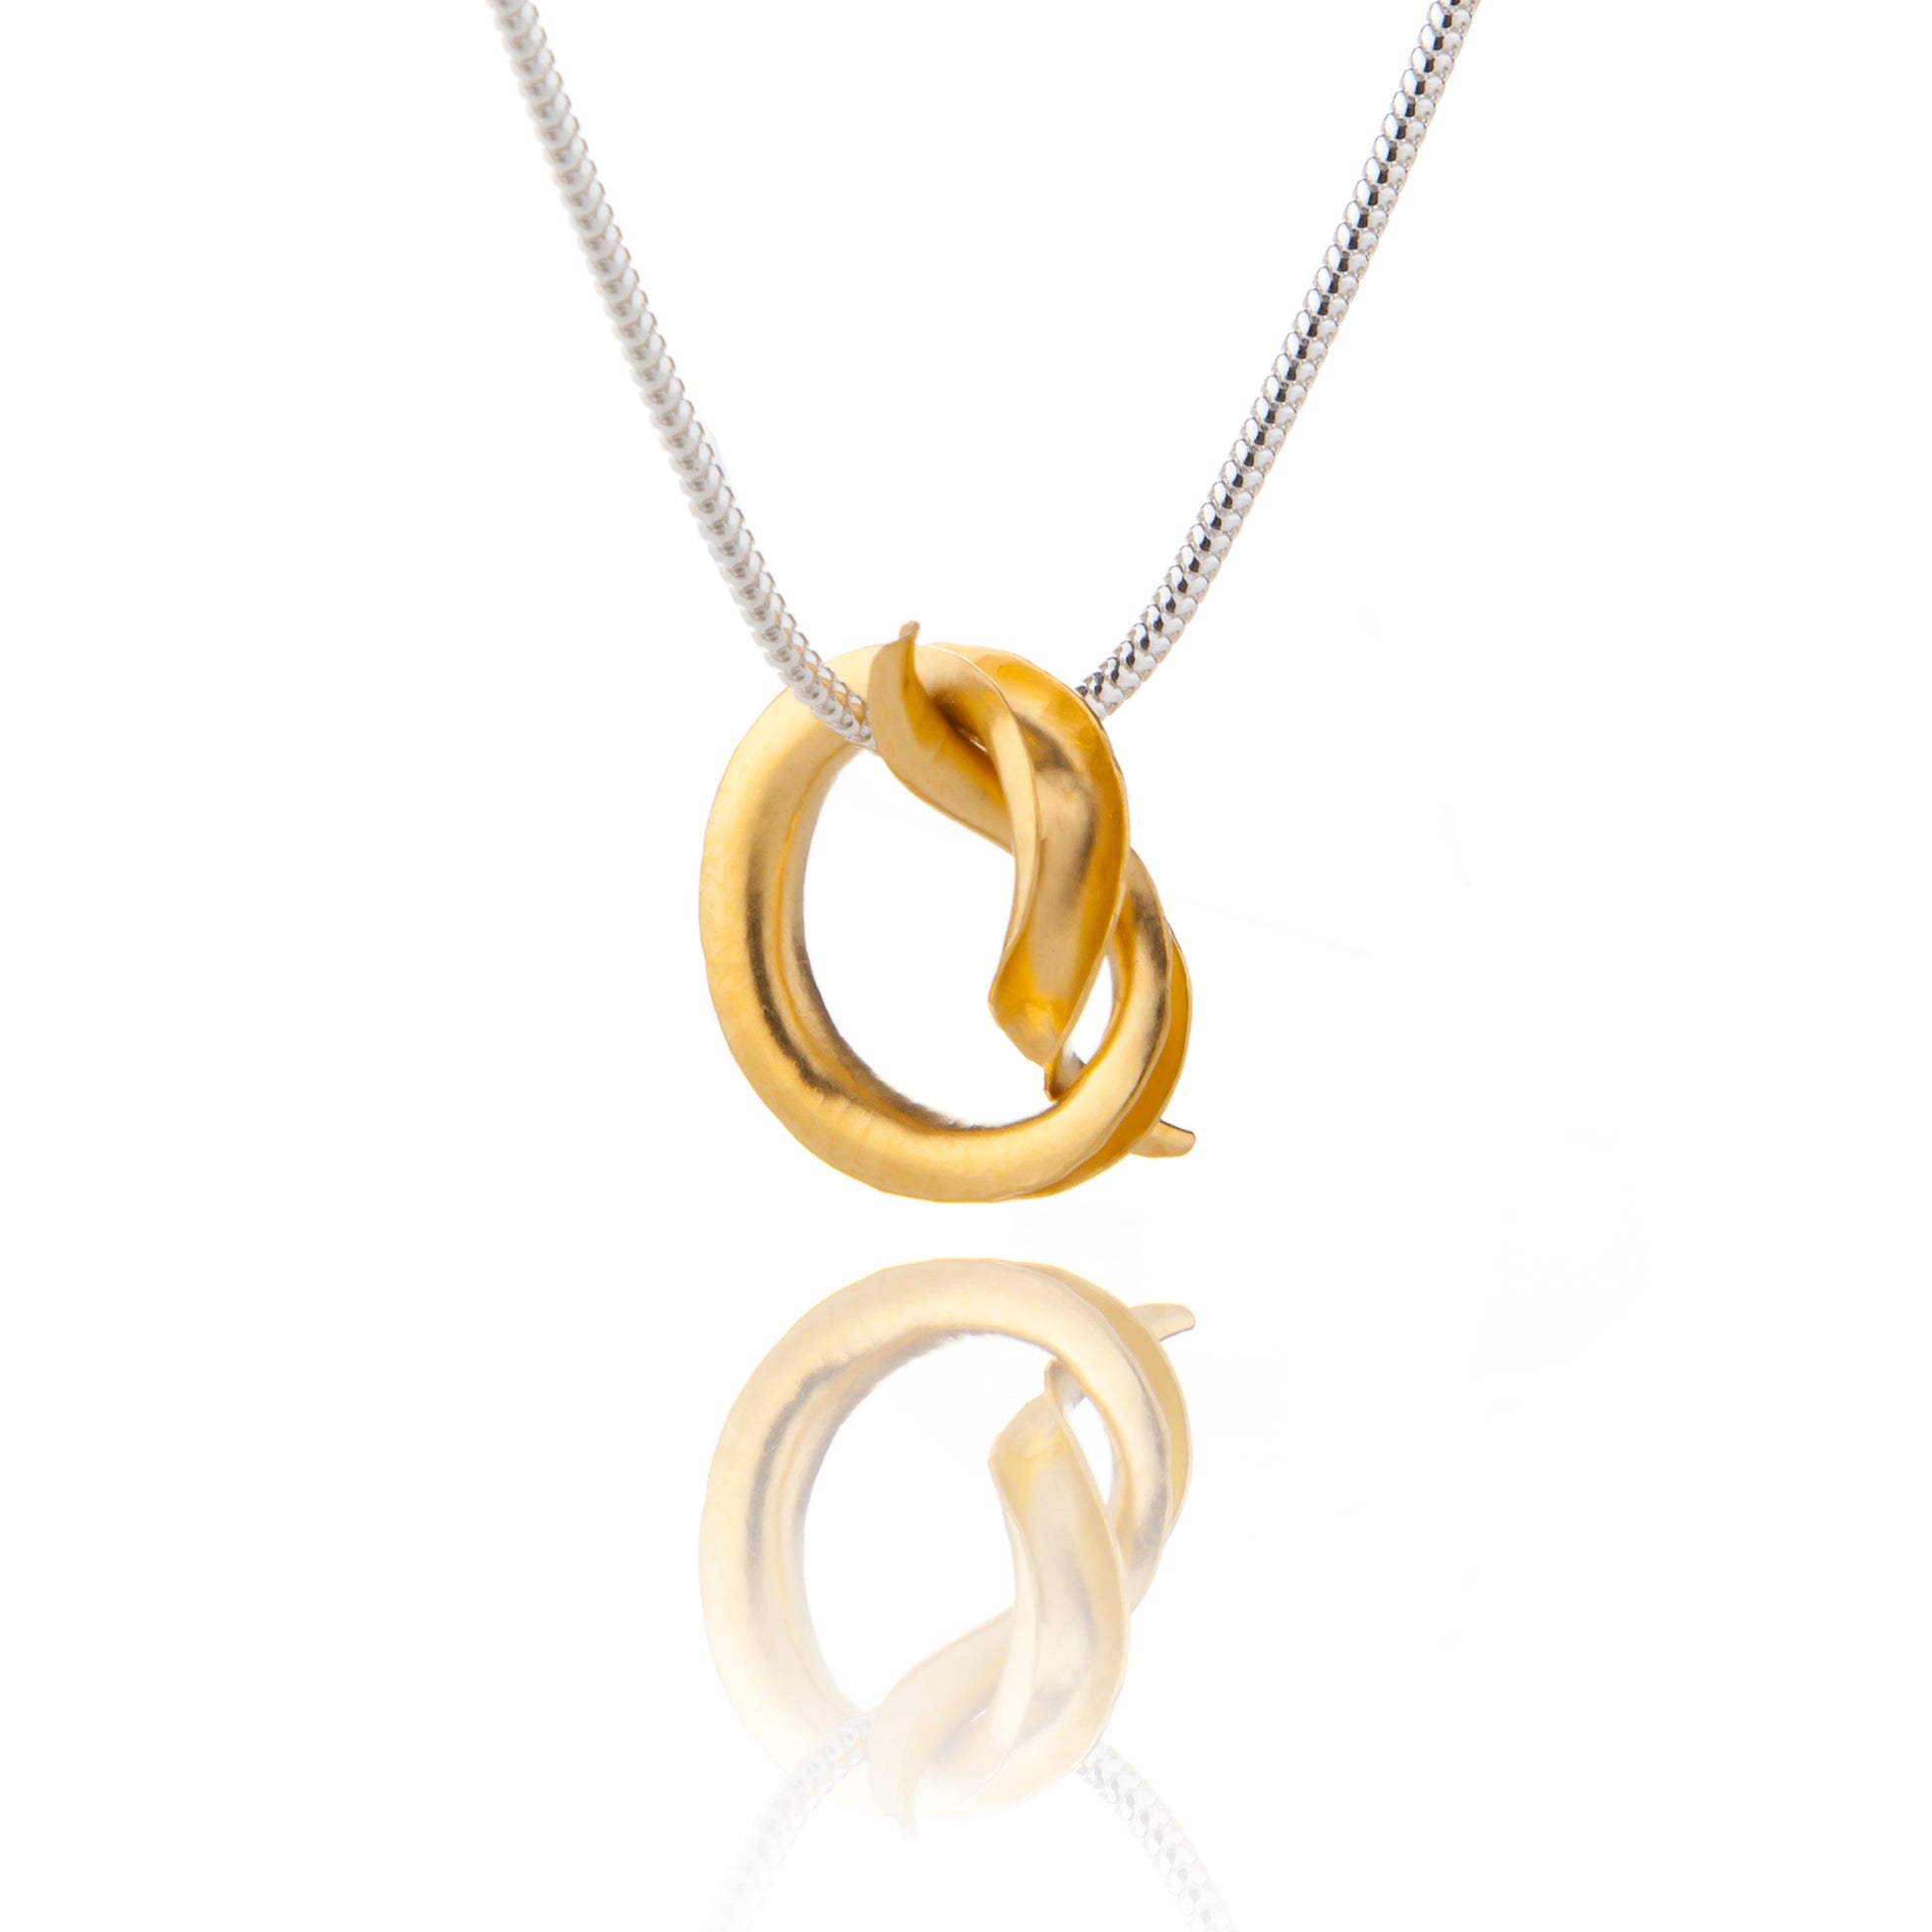 A silver pendant in the shape of a knot, in the form of a tube open down one side and gold plated all over, hanging from a silver snake chain.